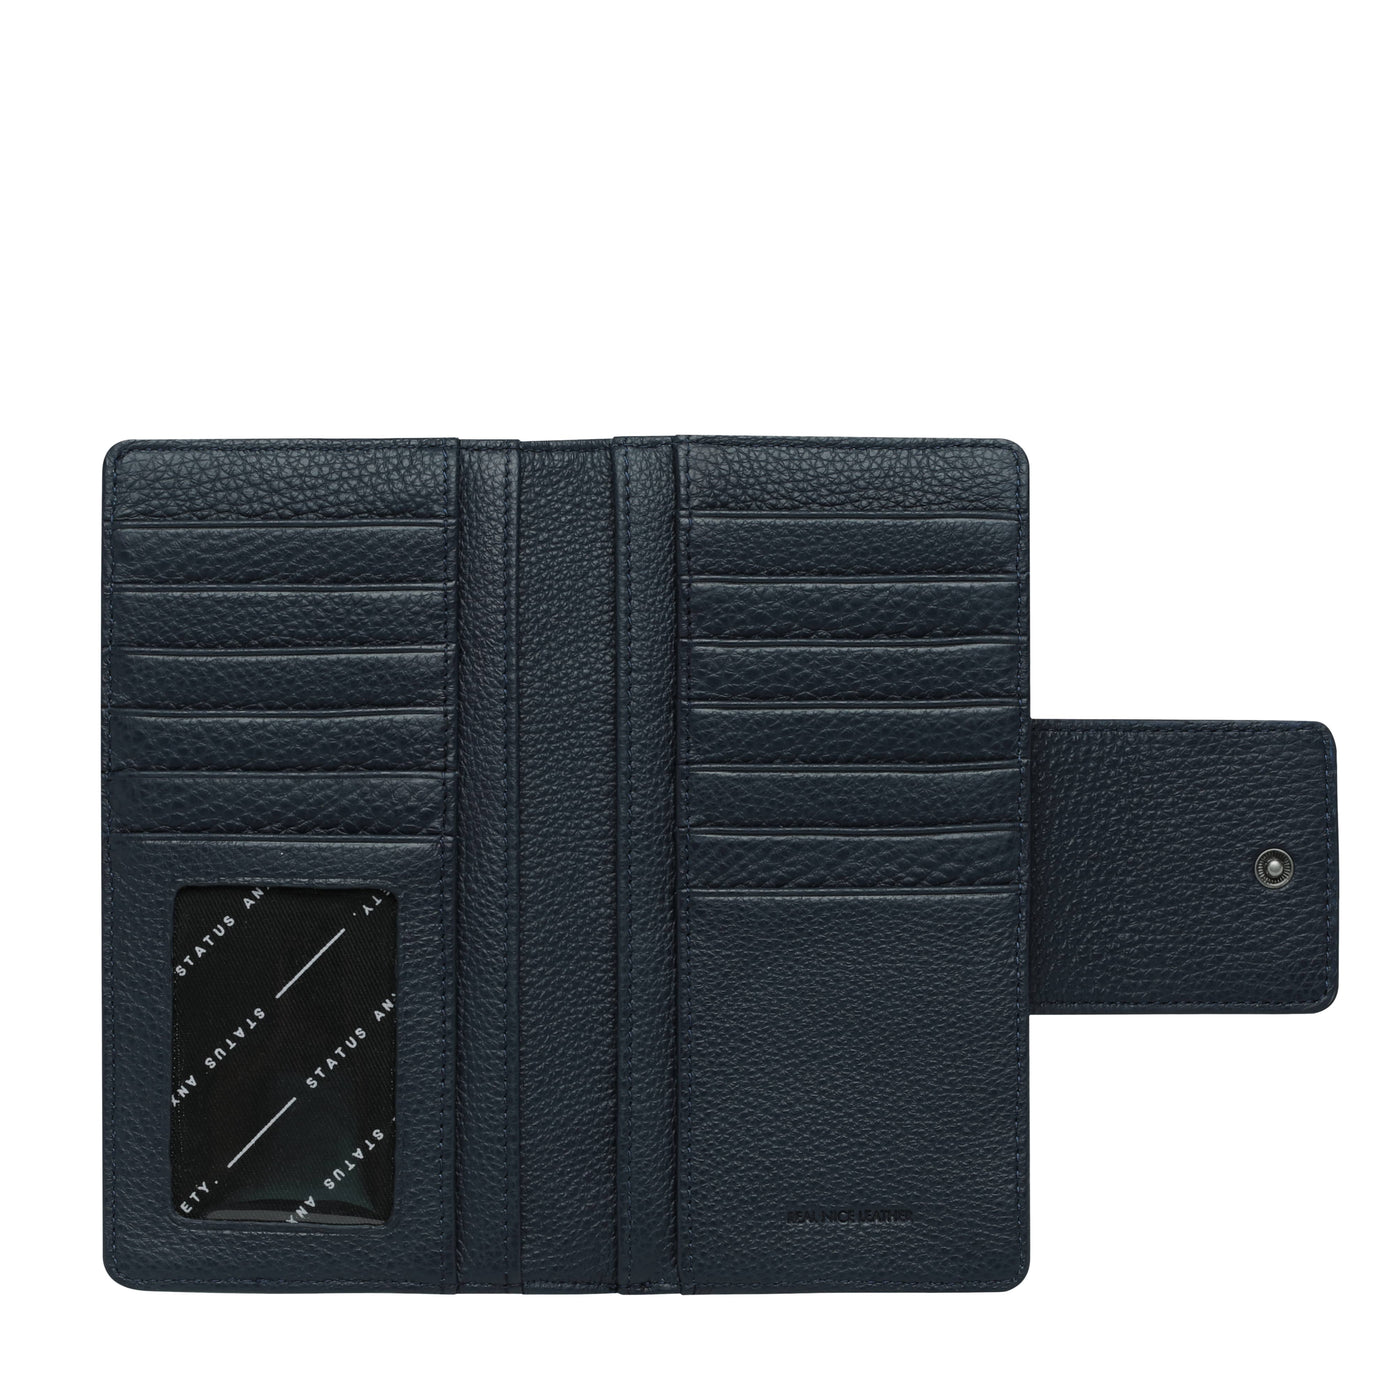 STATUS ANXIETY RUINS WALLET   The Status Anxiety Ruins Wallet is an easy-to-carry wallet, with a slim silhouette and profile, making it perfect for daily use and any outfit. The Ruins Wallet features a oversized clip clasp to close, with a large external coin pocket, and plenty of internal card slots, and individual bank note spaces. The outside zipper section makes for easy access to your cash without having to open the main section of the wallet.